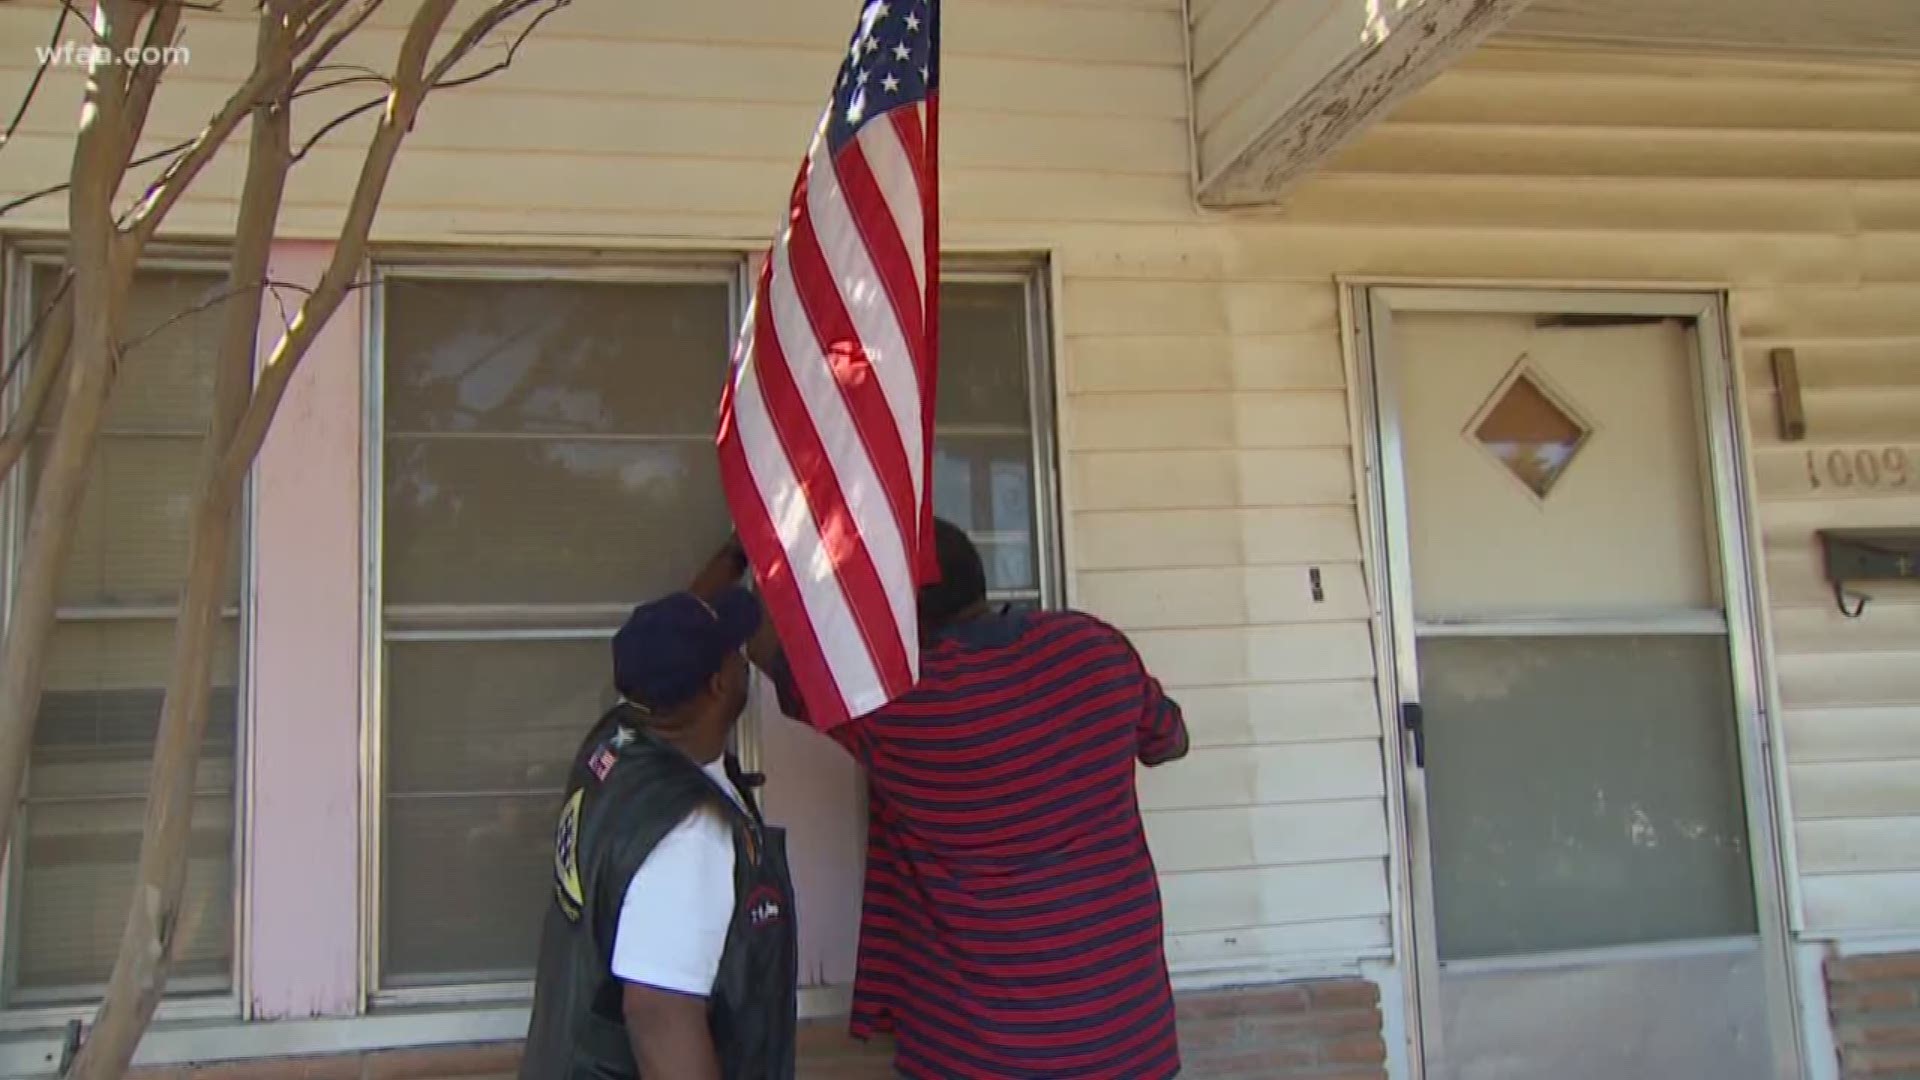 New owner, family of evicted veteran work to get house 'back in right hands'